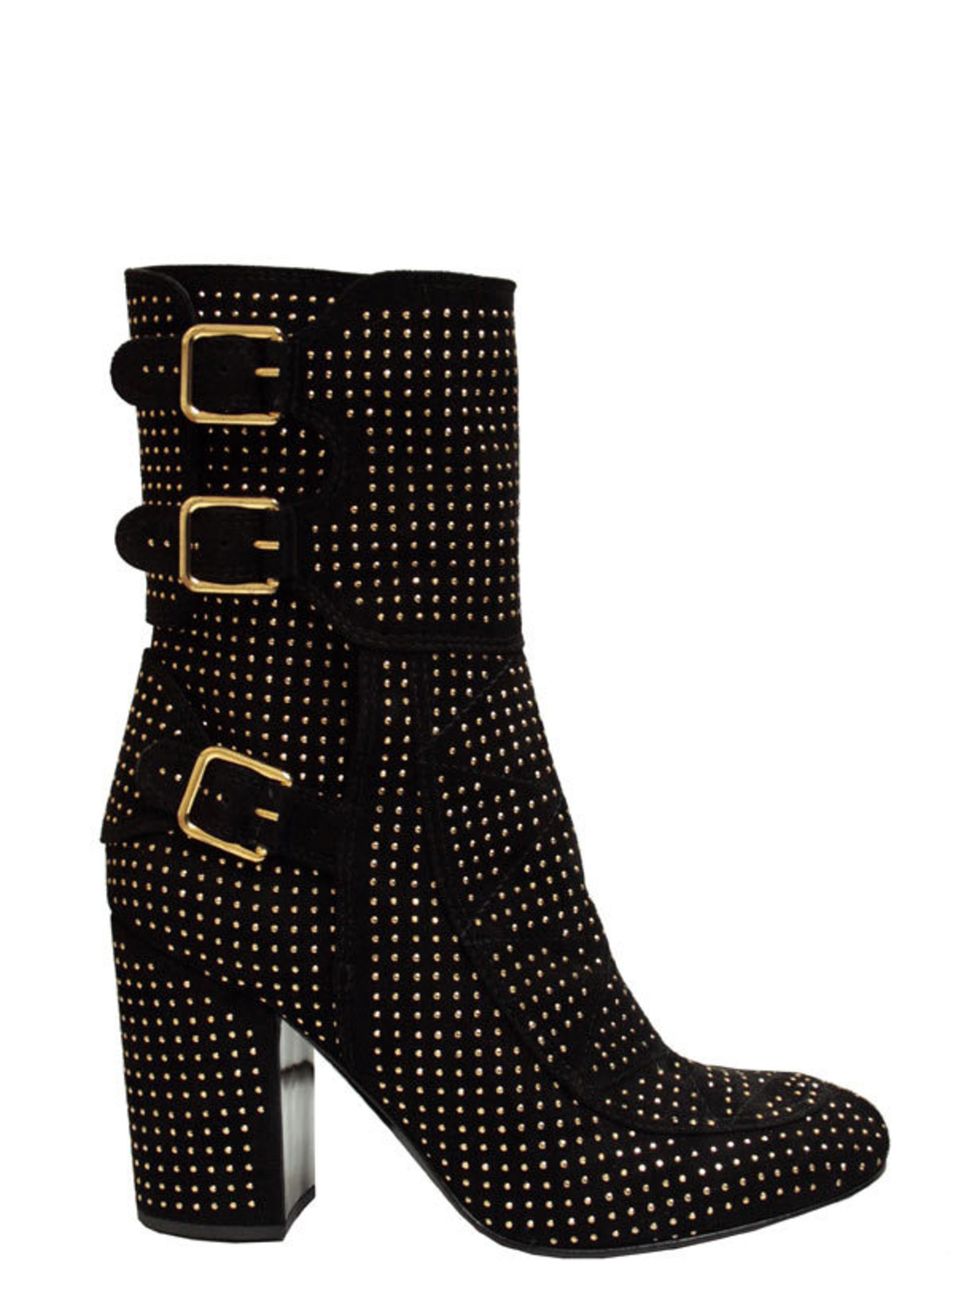 <p>Laurence Dacade 'Merli' gold studded suede boots, £820, at <a href="http://www.brownsfashion.com/Product/Women/Women/Clothing/Autumn_Boots/Merli_studded_suede_boots/Product.aspx?p=670600&amp;pc=3386777&amp;cl=4">Browns</a></p>